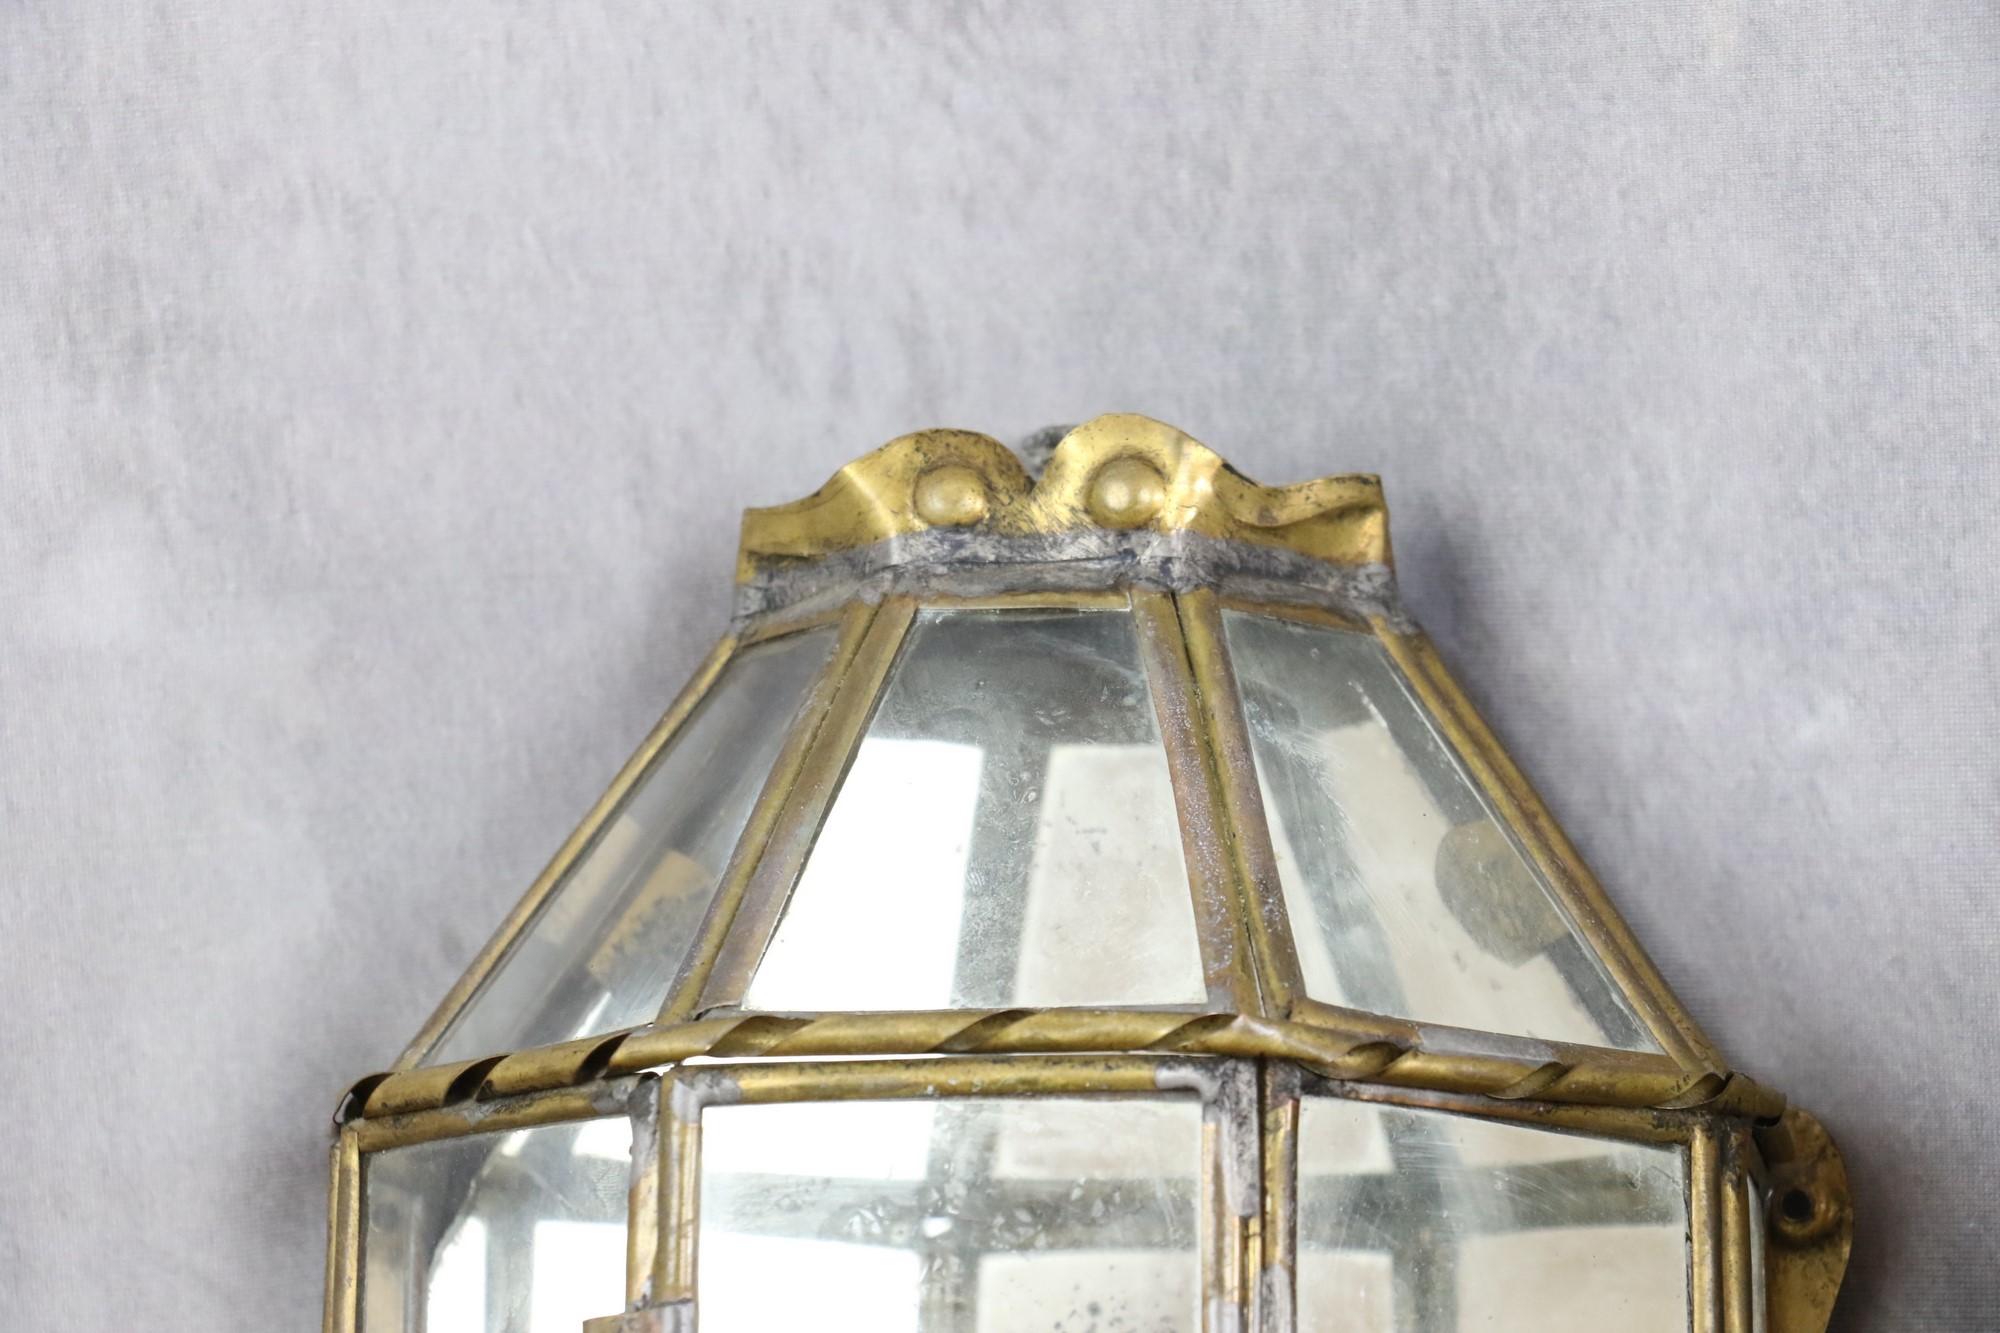 20th Century Trio of Brass and Glass Vintage Handcrafted Lantern Wall Lamps, 1940s, France